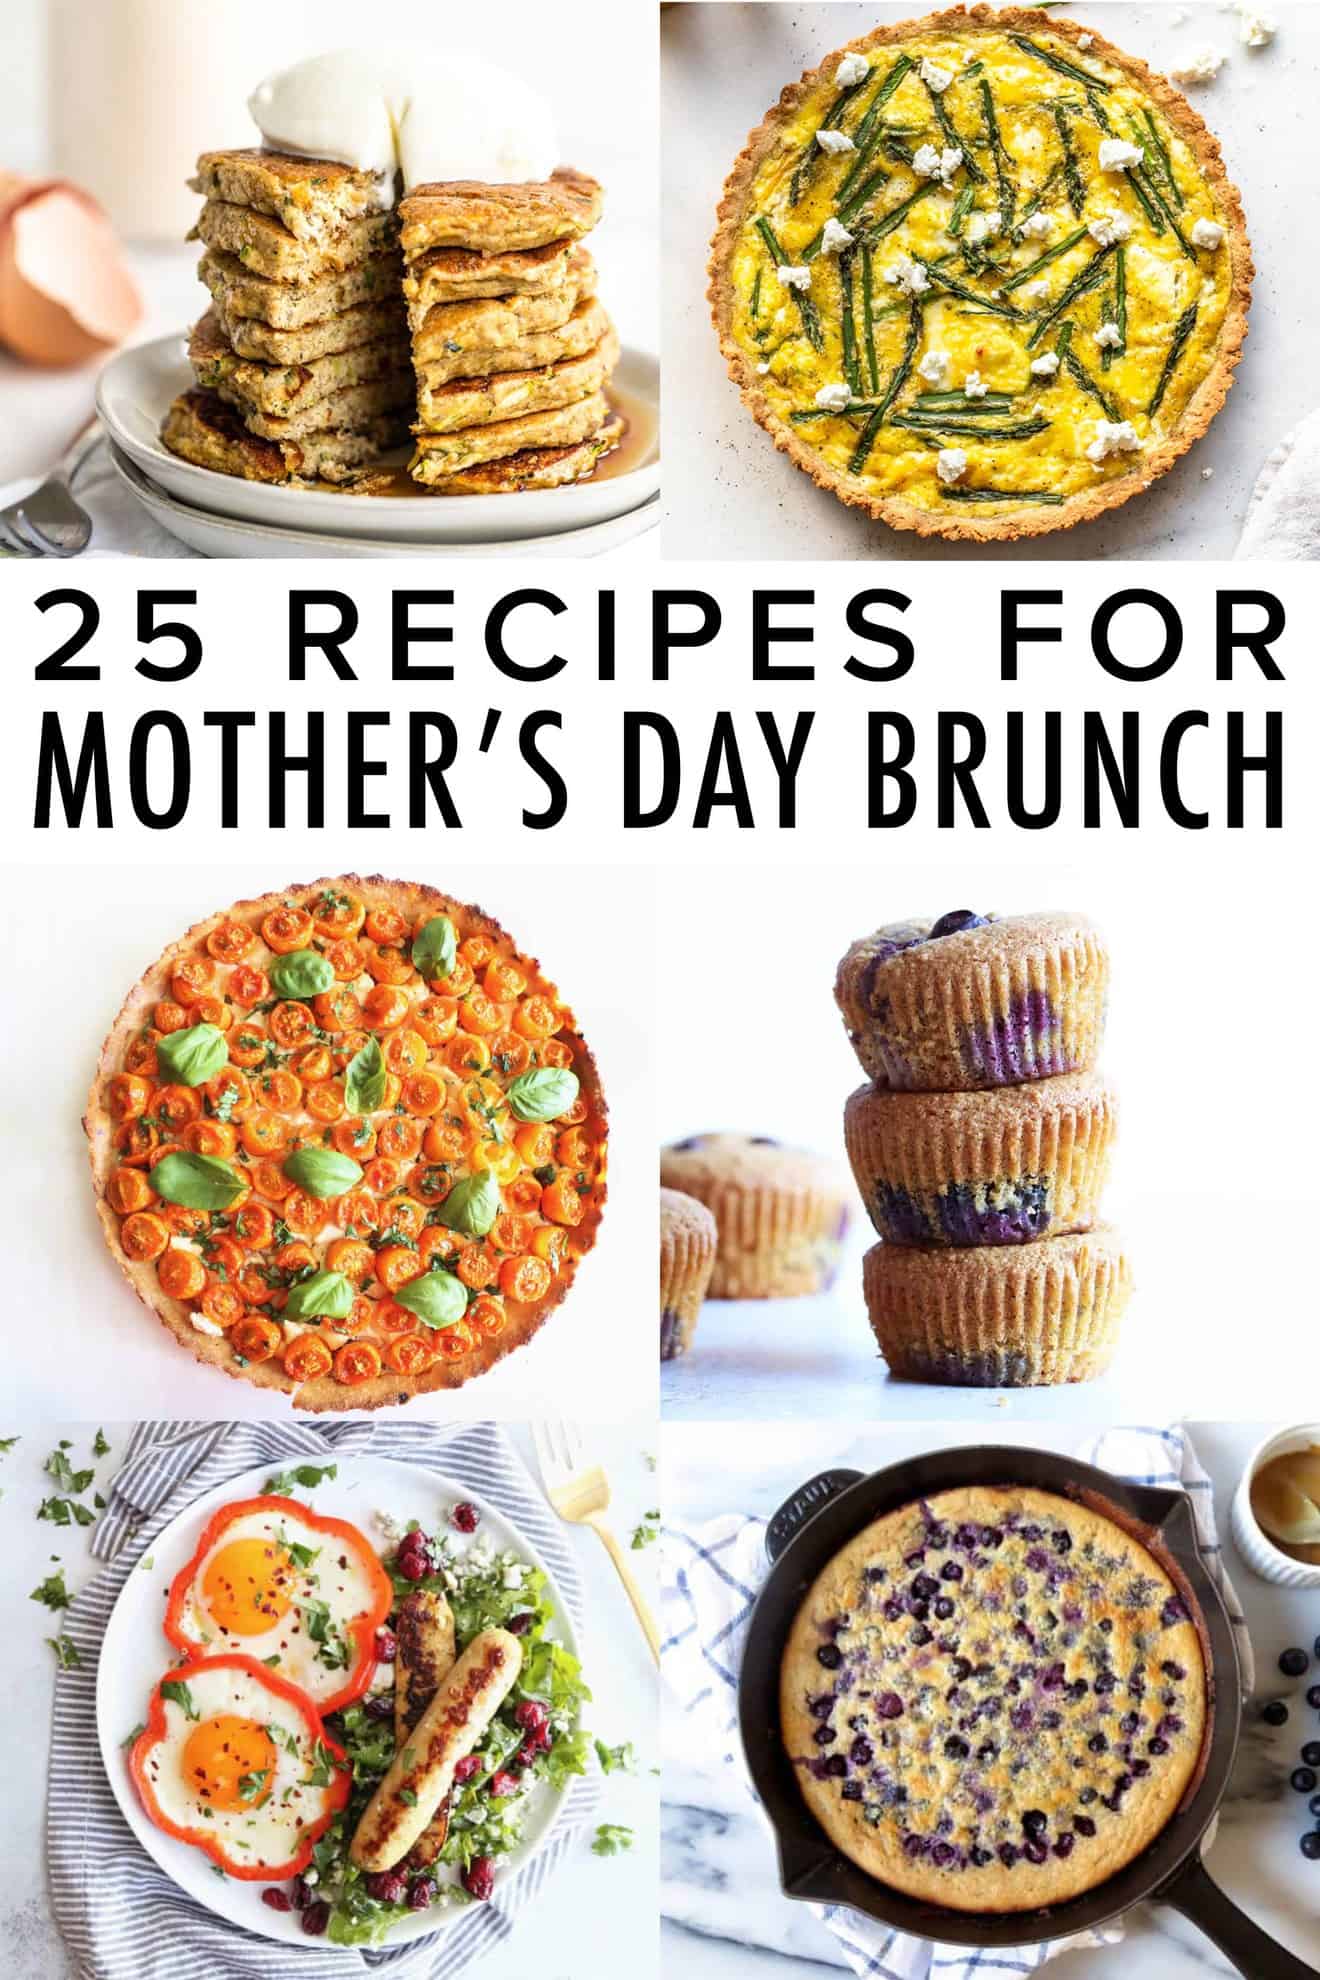 Today I'm rounding up 25 Mother's Day Brunch Recipes that everyone will love whether you're having a low key celebration at home or a huge family gathering! thetoastedpinenut.com #thetoastedpinenut #reciperoundup #roundup #mothersday #mothersdayrecipes #mothersdaybrunch